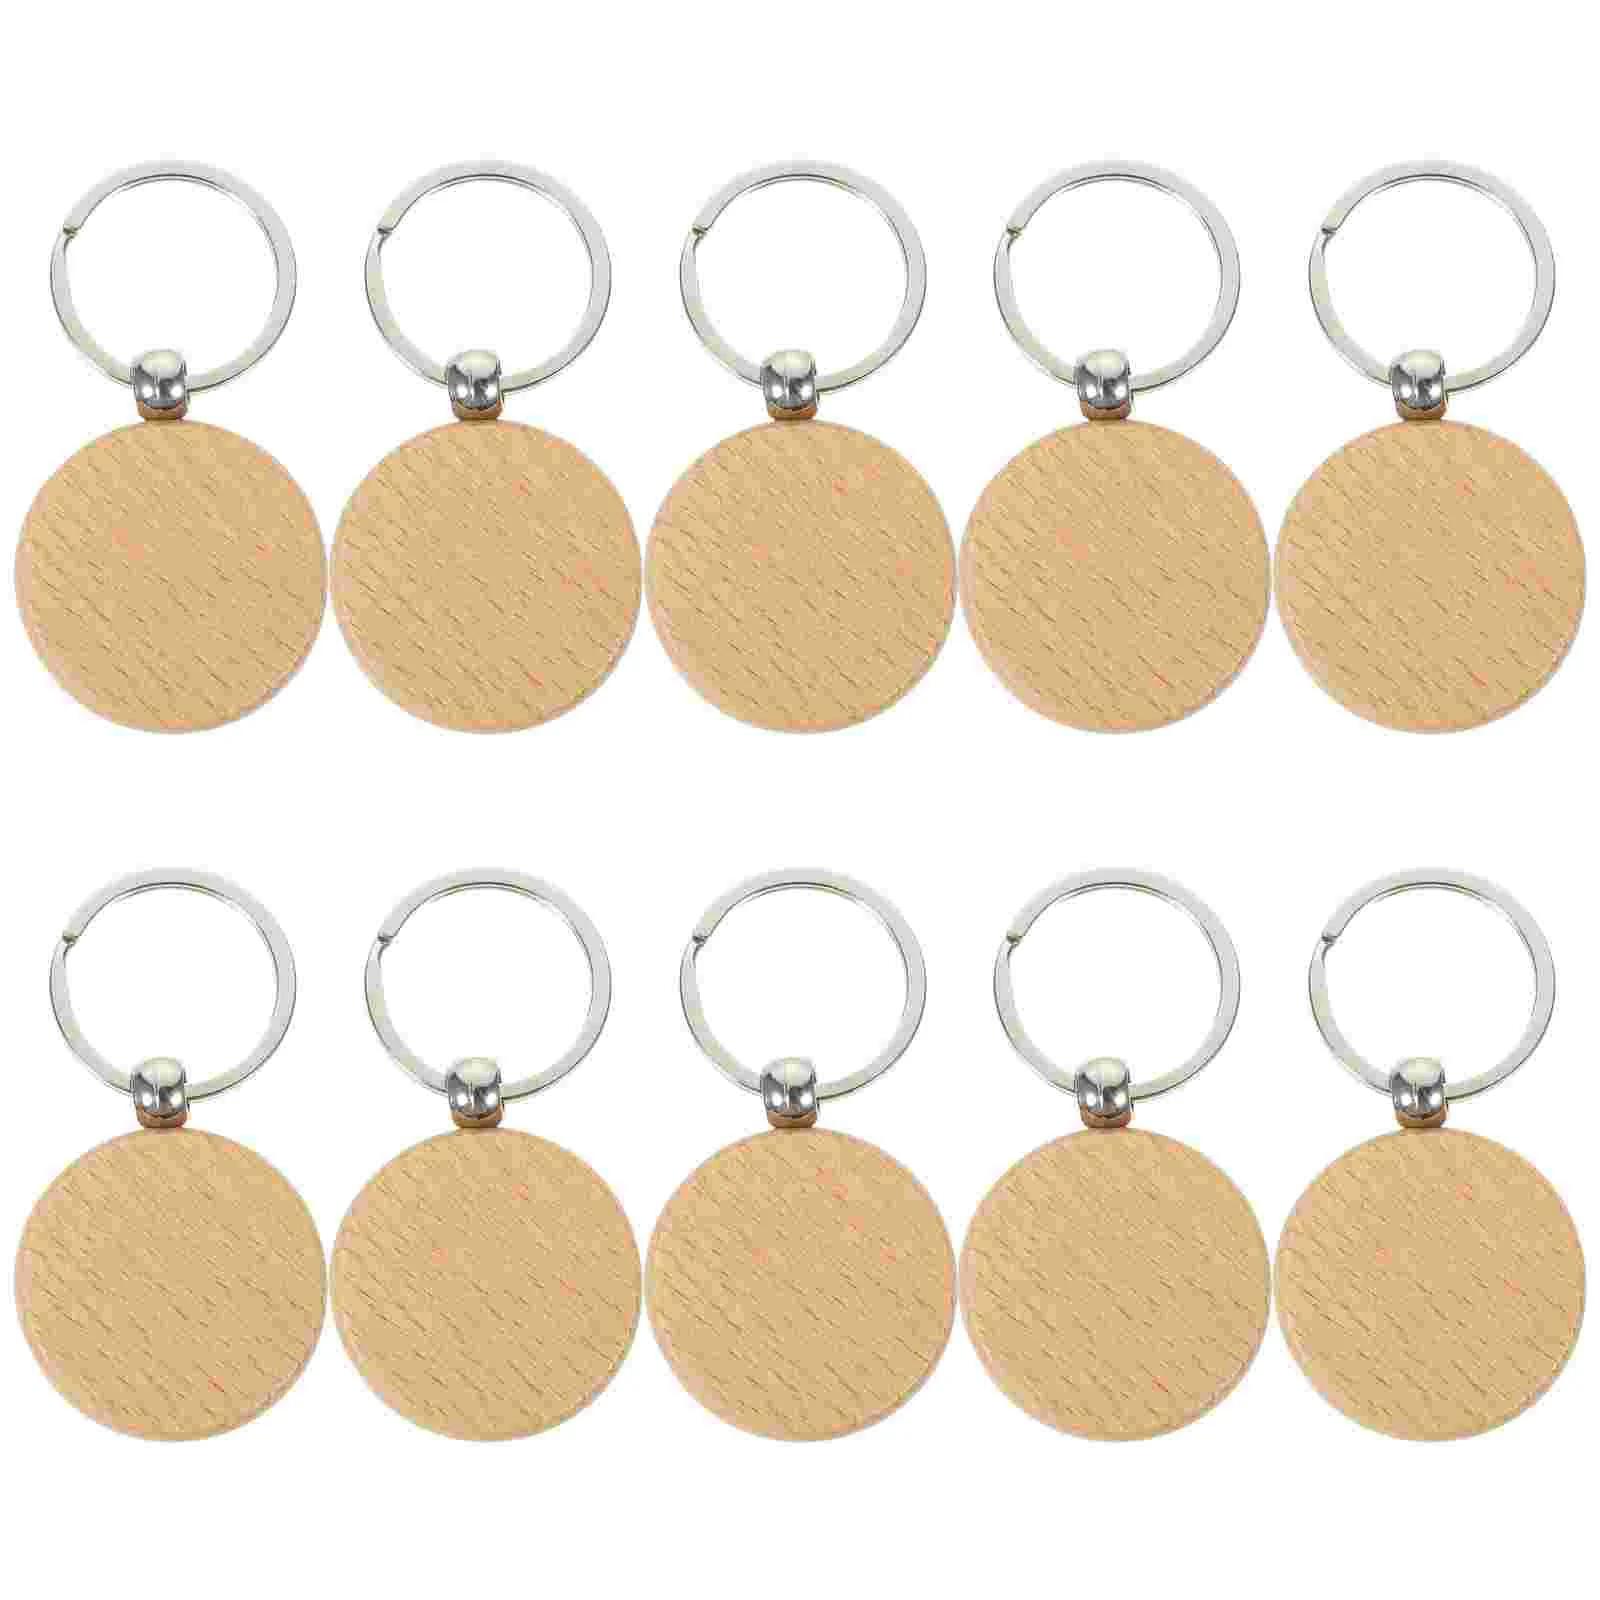 

20Pcs Blank Keychains Wood Keychain Blanks Wooden Key Rings Crafts Engravable Wooden Keychains